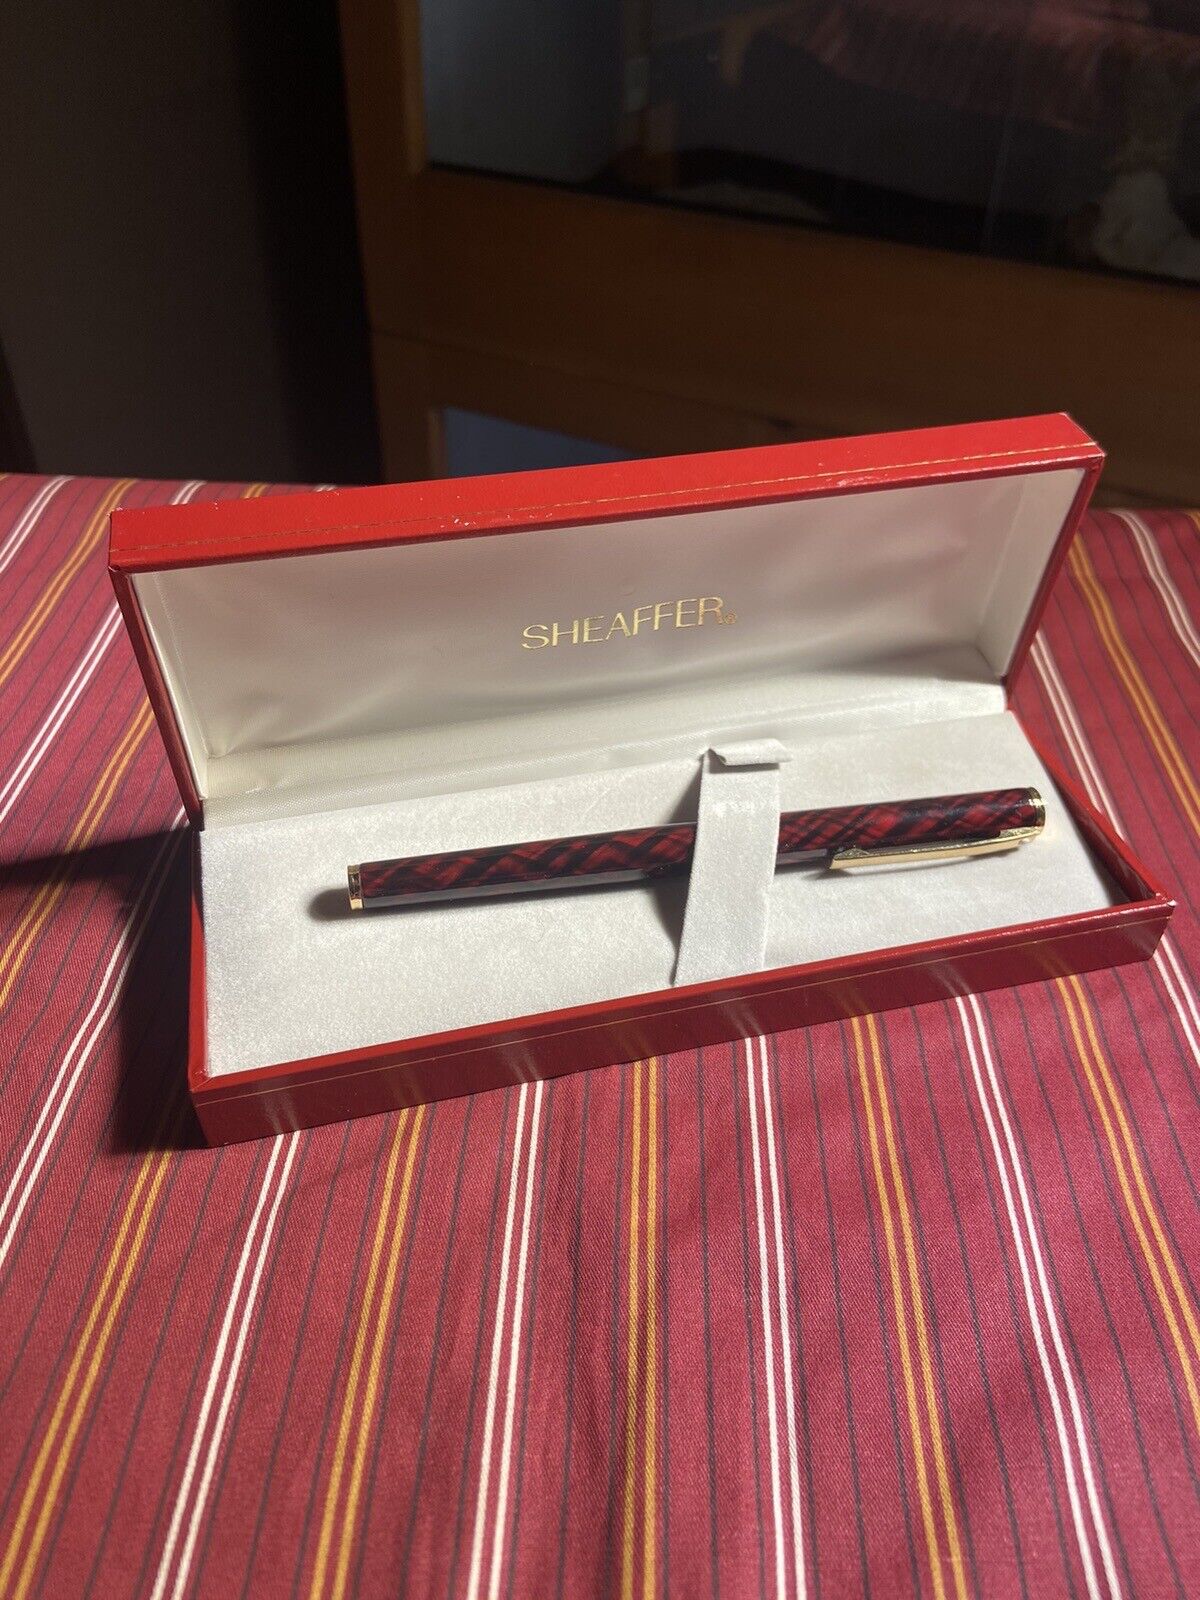 Sheaffer Vintage Fountain Pen Tarter Red Possibly 1980’s